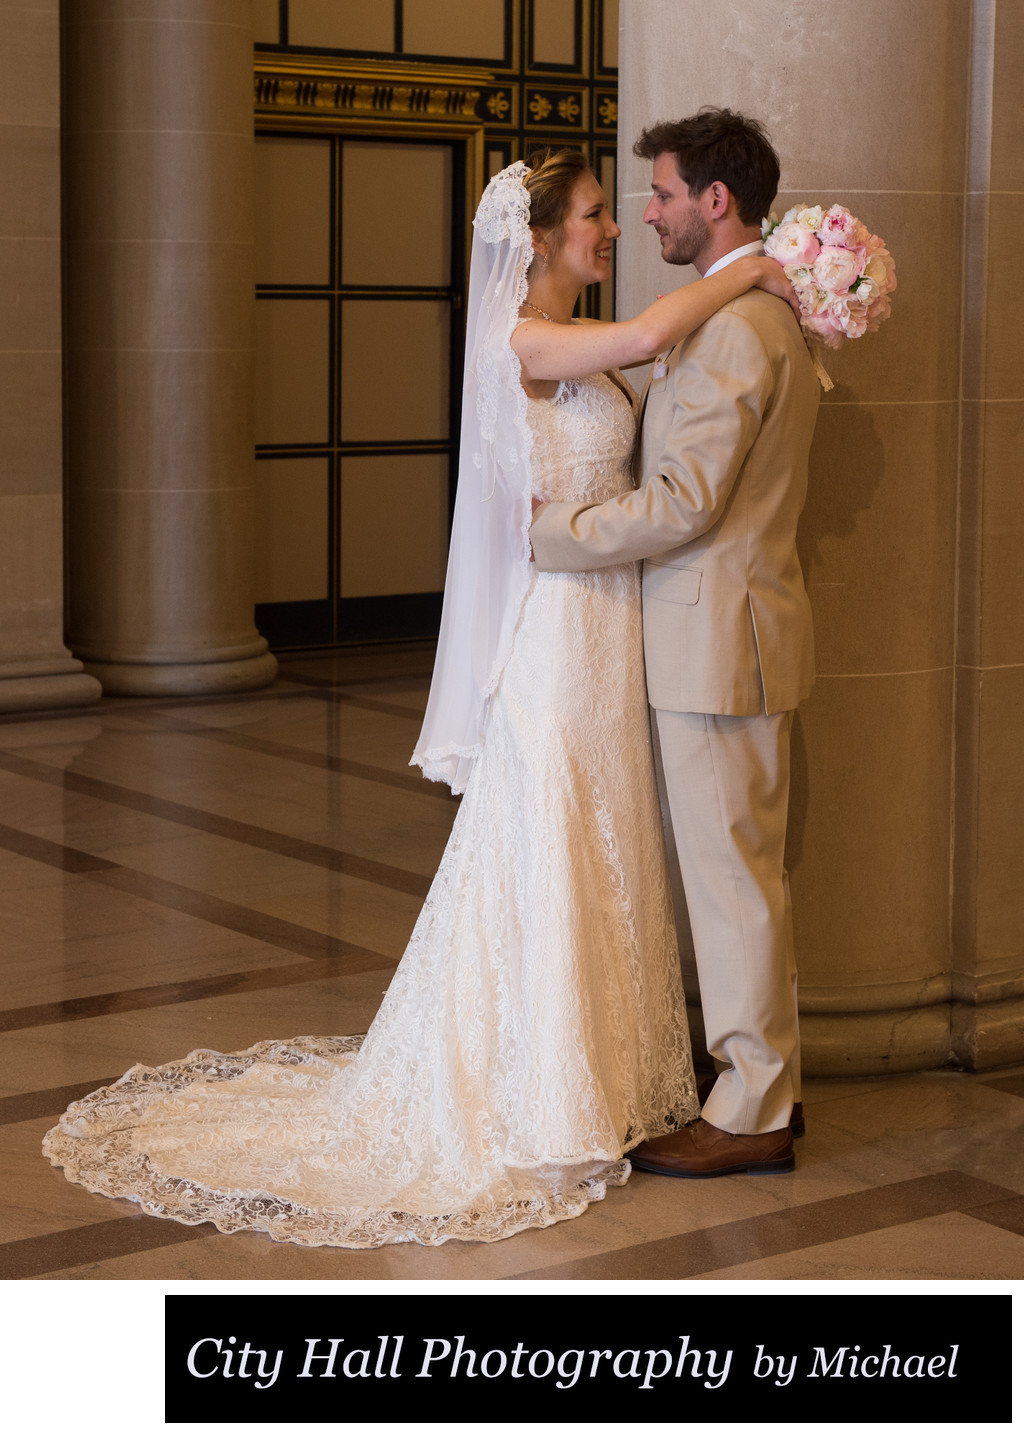 1st look wedding photography image at SF City Hall